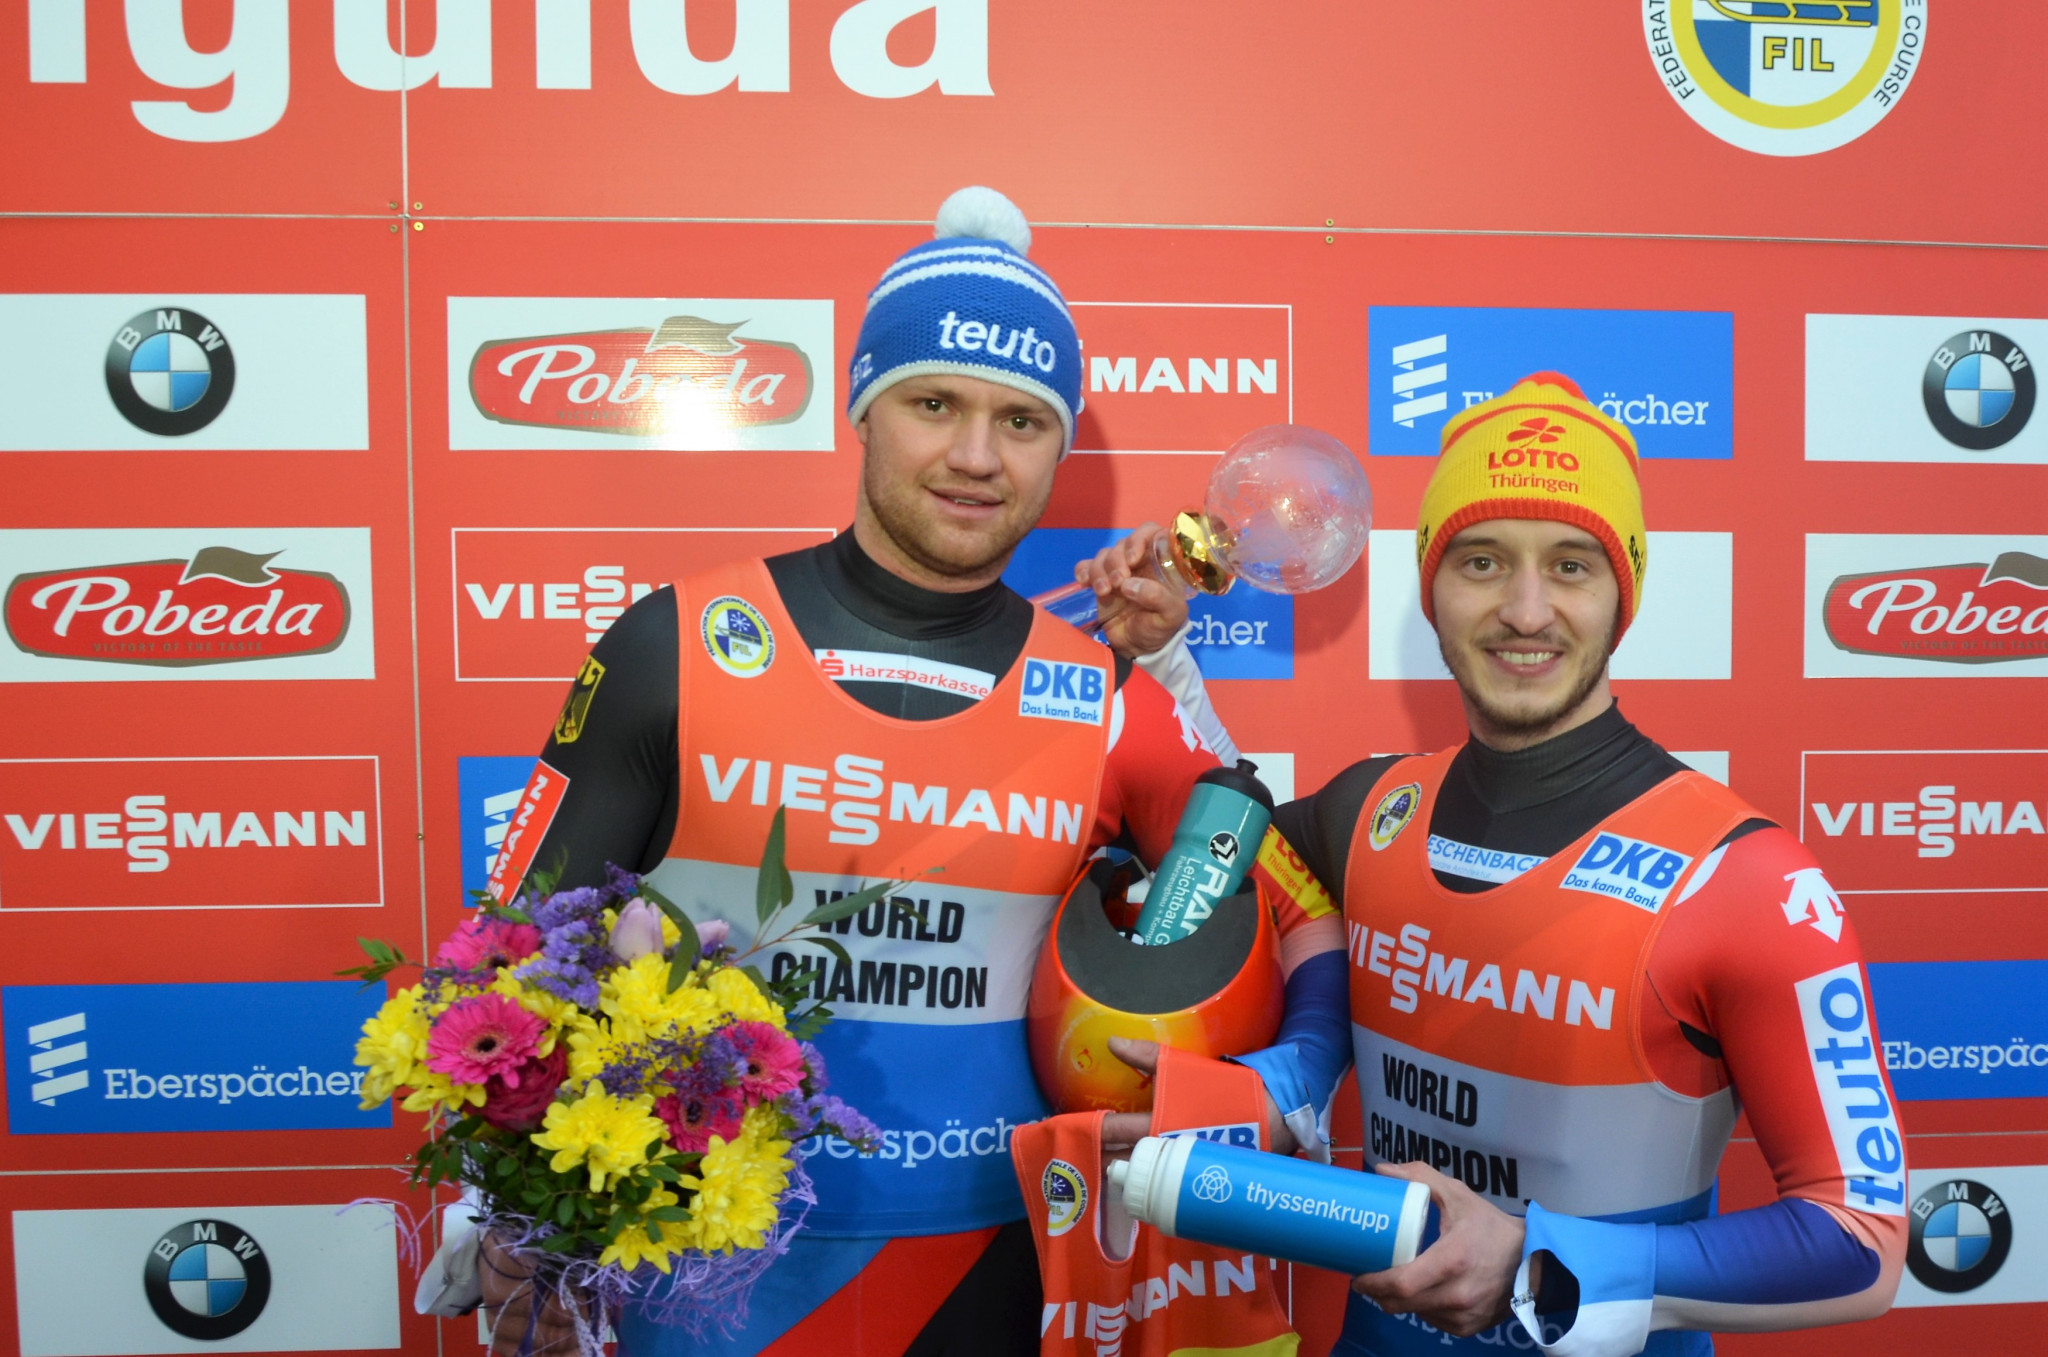 World champions Toni Eggert and Sascha Benecken enjoyed double success at the event in Sigulda as they clinched the European Championships gold medal and wrapped up the overall World Cup title ©FIL